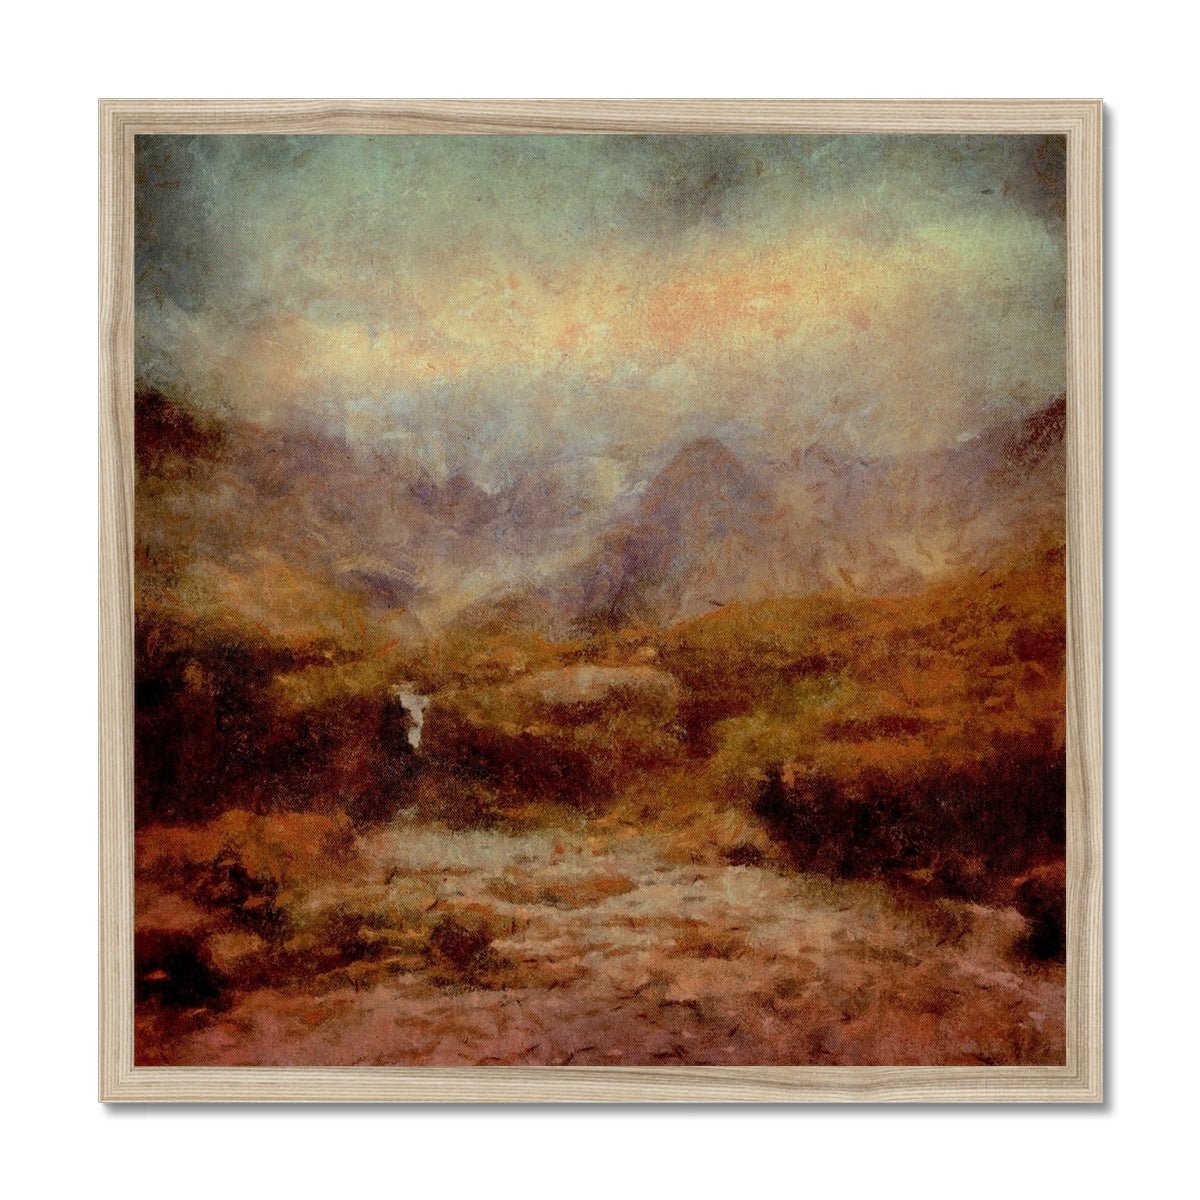 The Brooding Fairy Pools Skye Painting | Framed Prints From Scotland-Framed Prints-Skye Art Gallery-20"x20"-Natural Frame-Paintings, Prints, Homeware, Art Gifts From Scotland By Scottish Artist Kevin Hunter